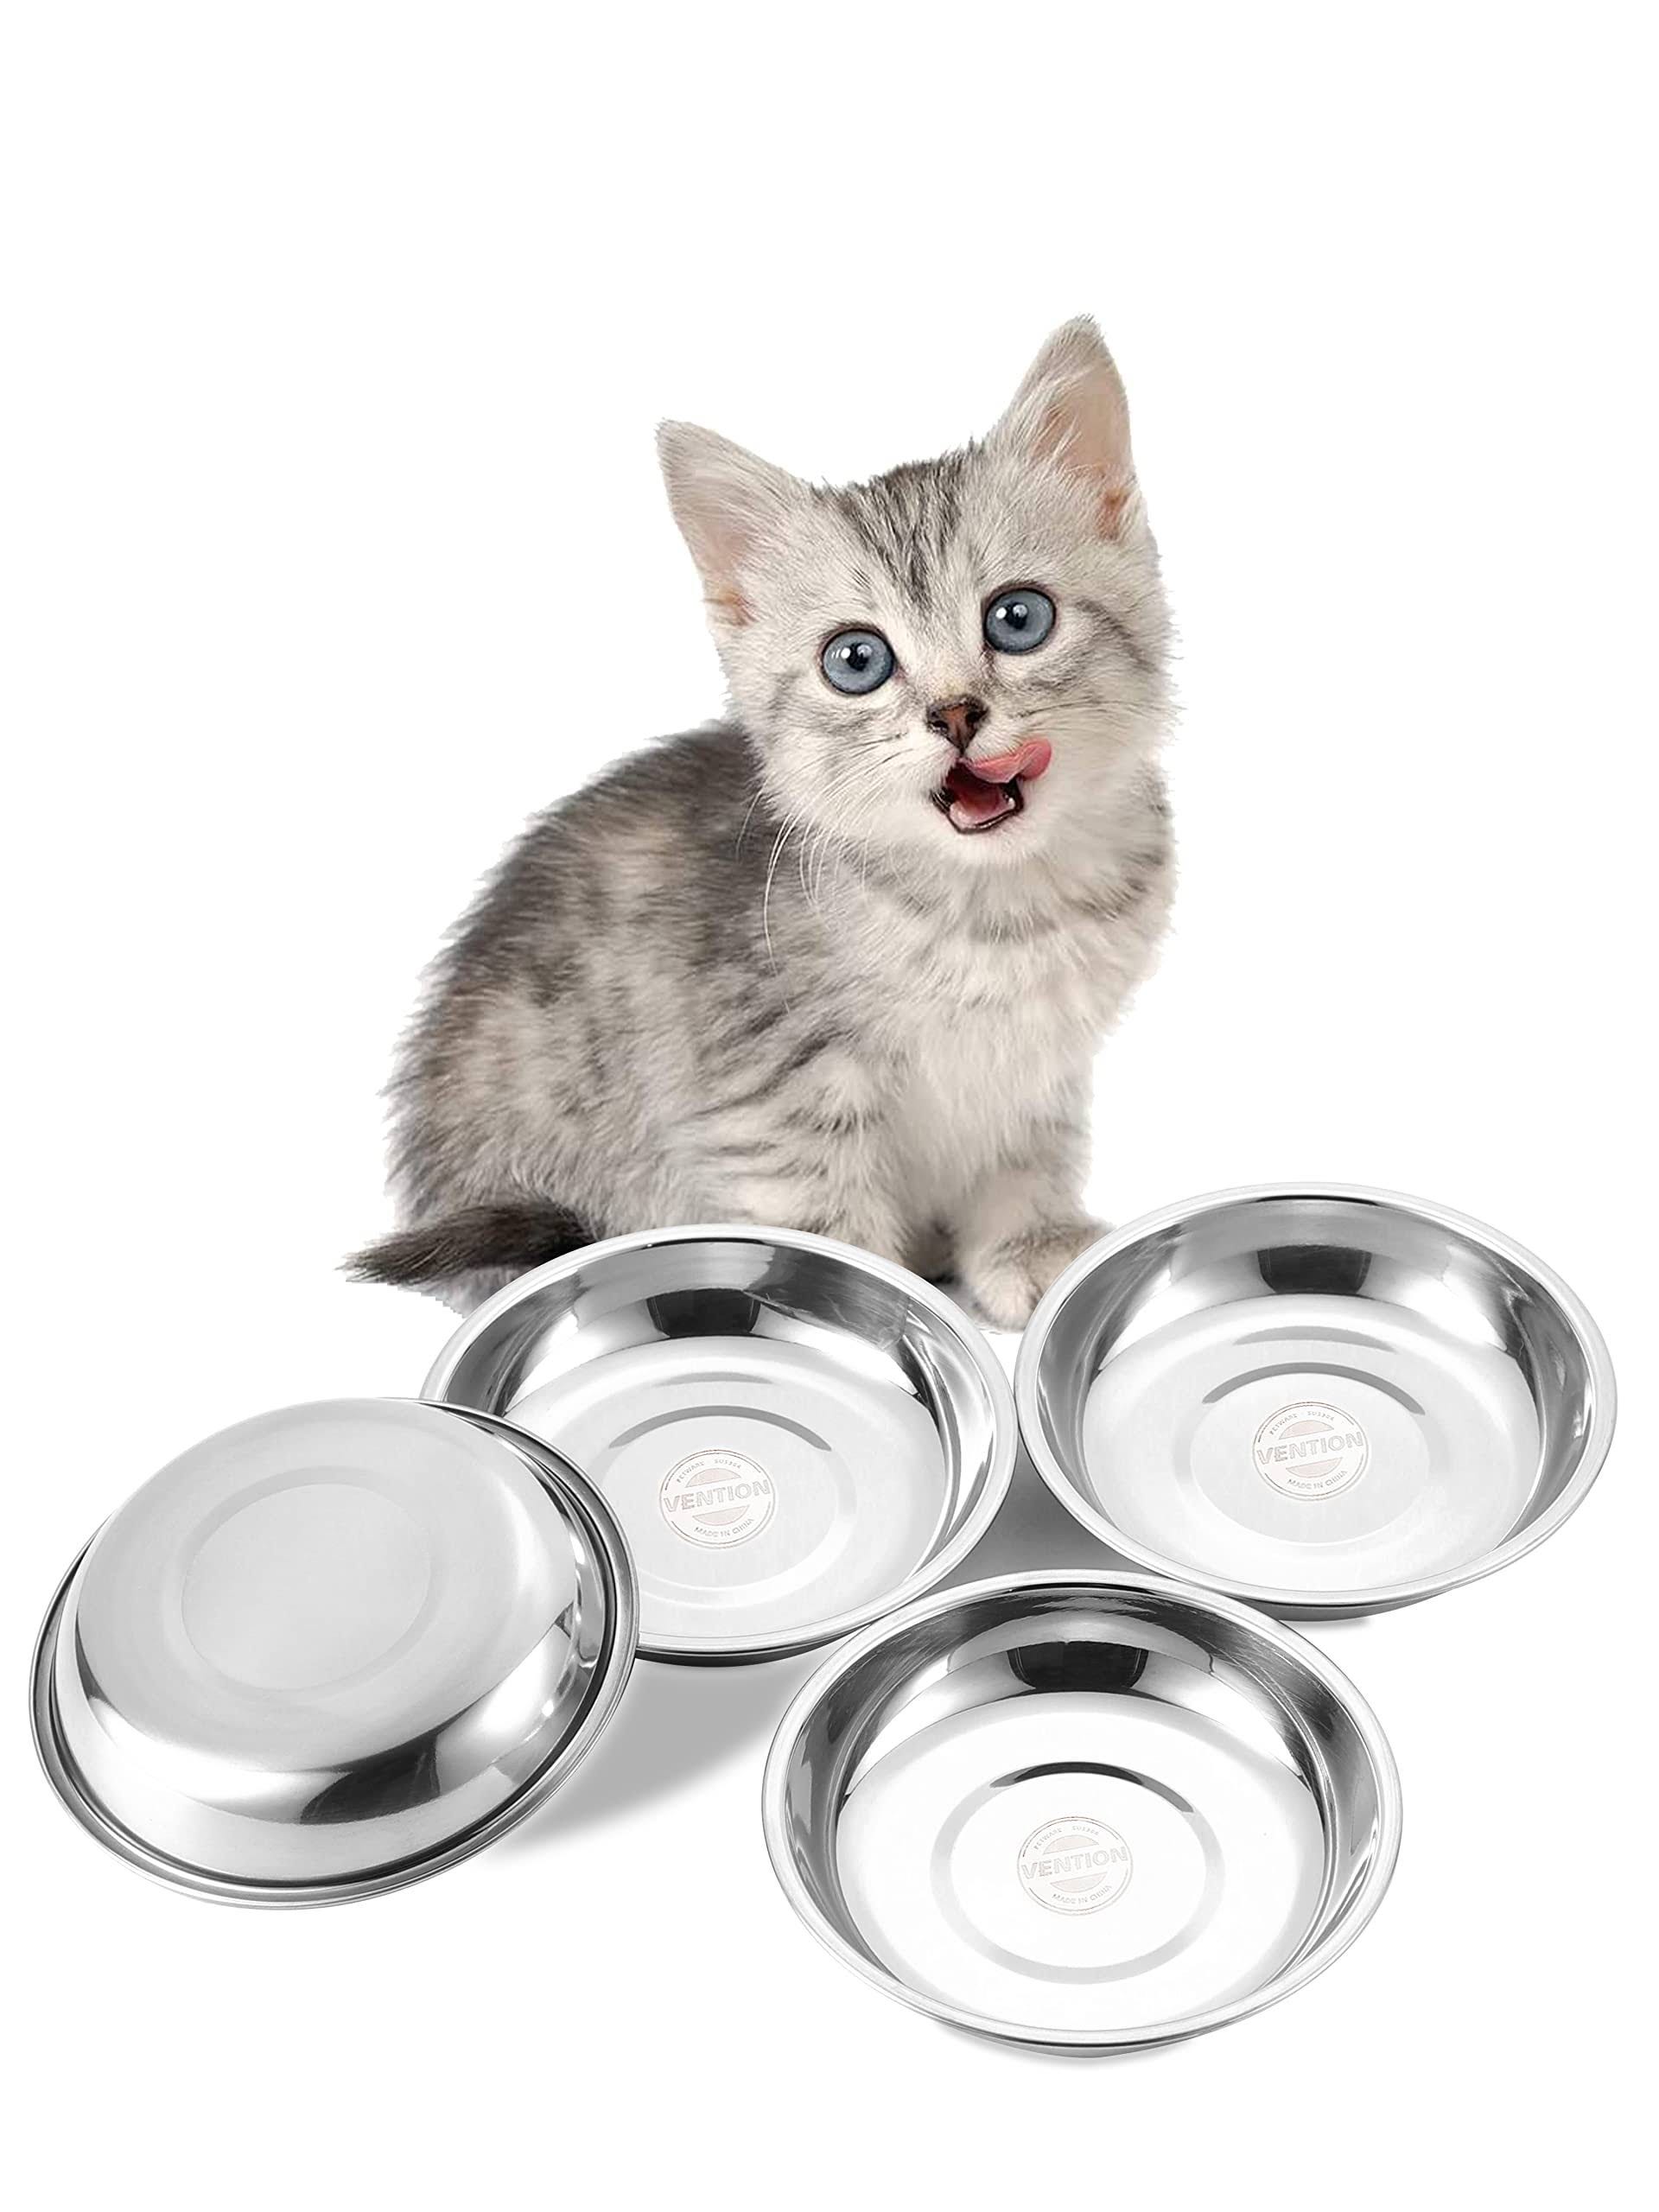 Vention Shallow Stainless Steel Cat Bowls for Whisker Relief | Image